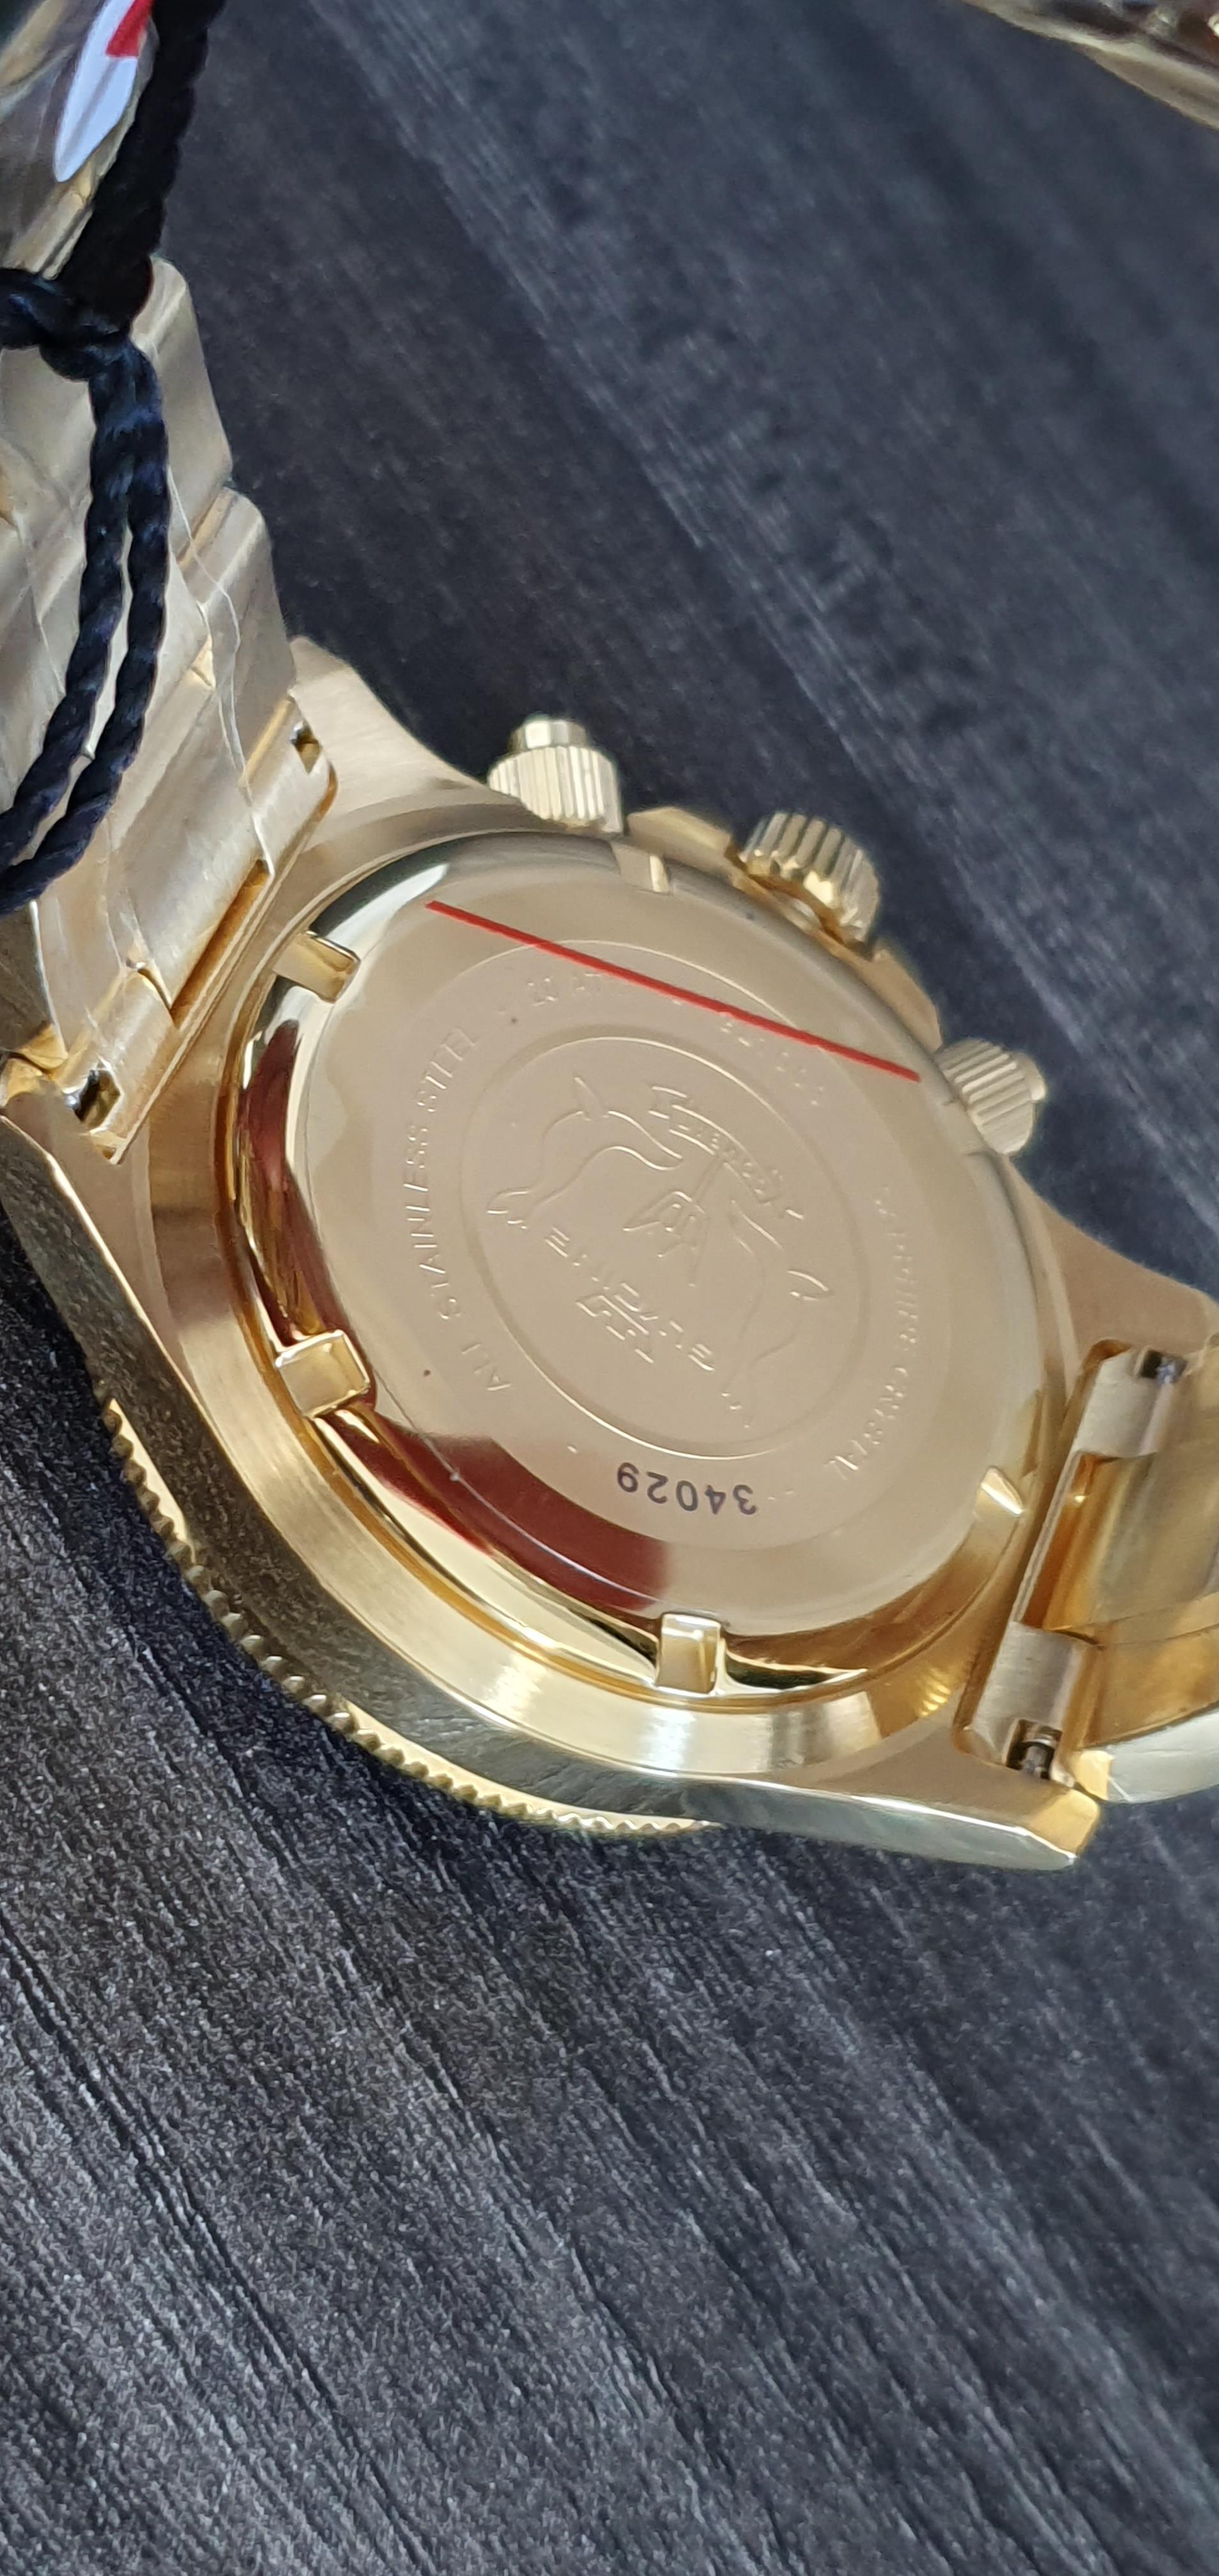 Glycine Gold Plated Watch - Image 4 of 8